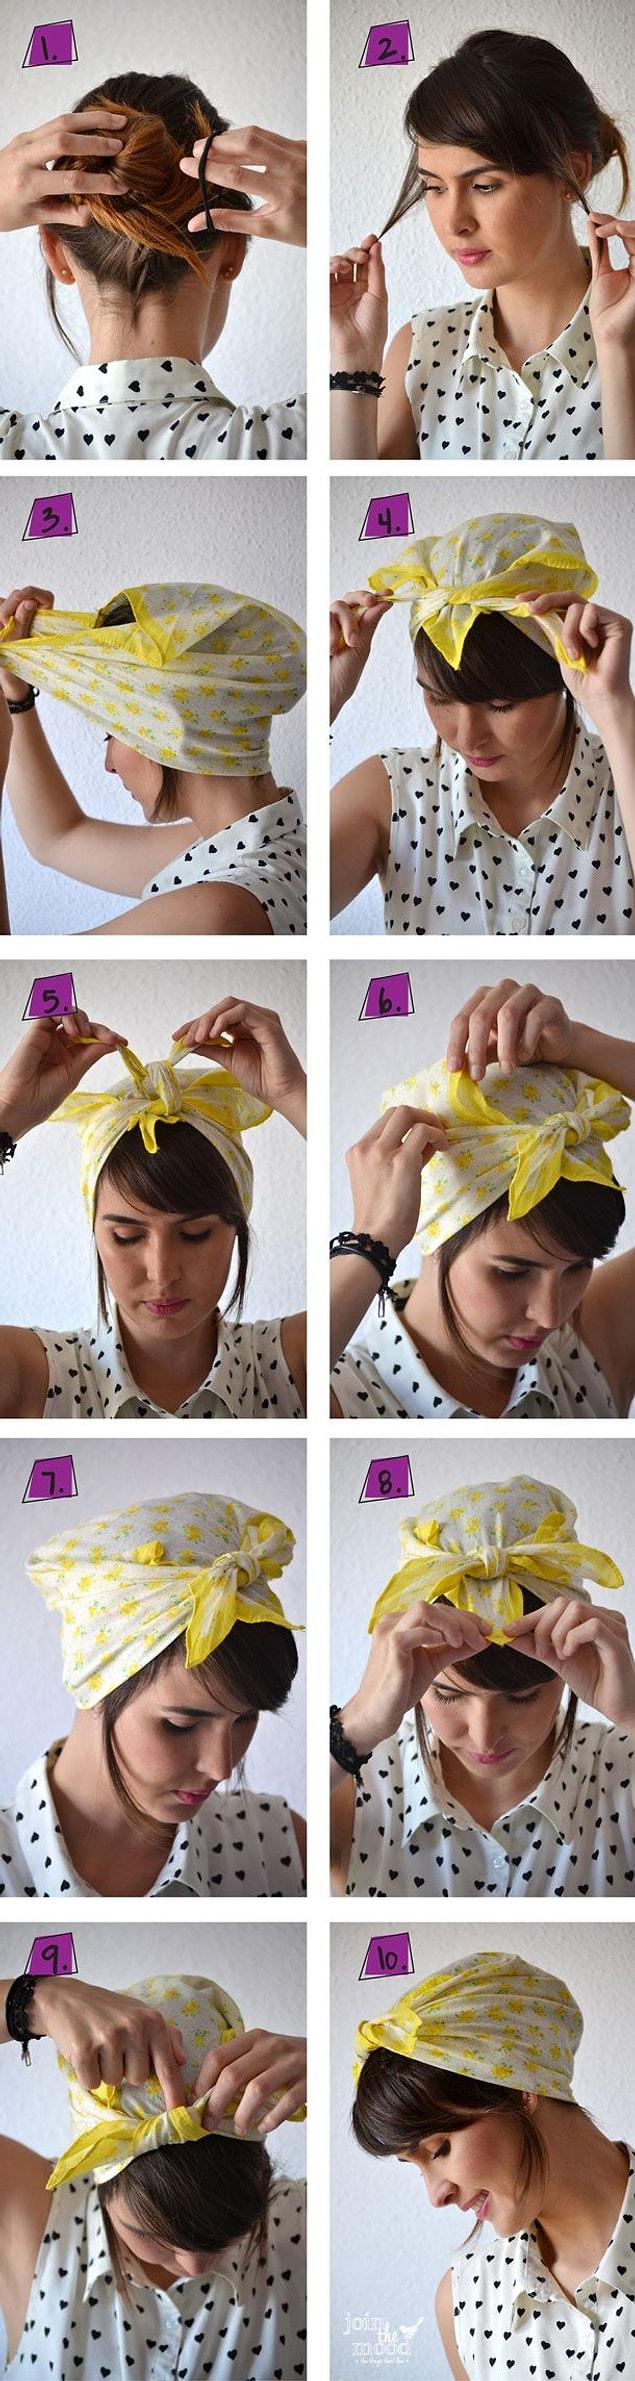 14. Another bad hair day saver: